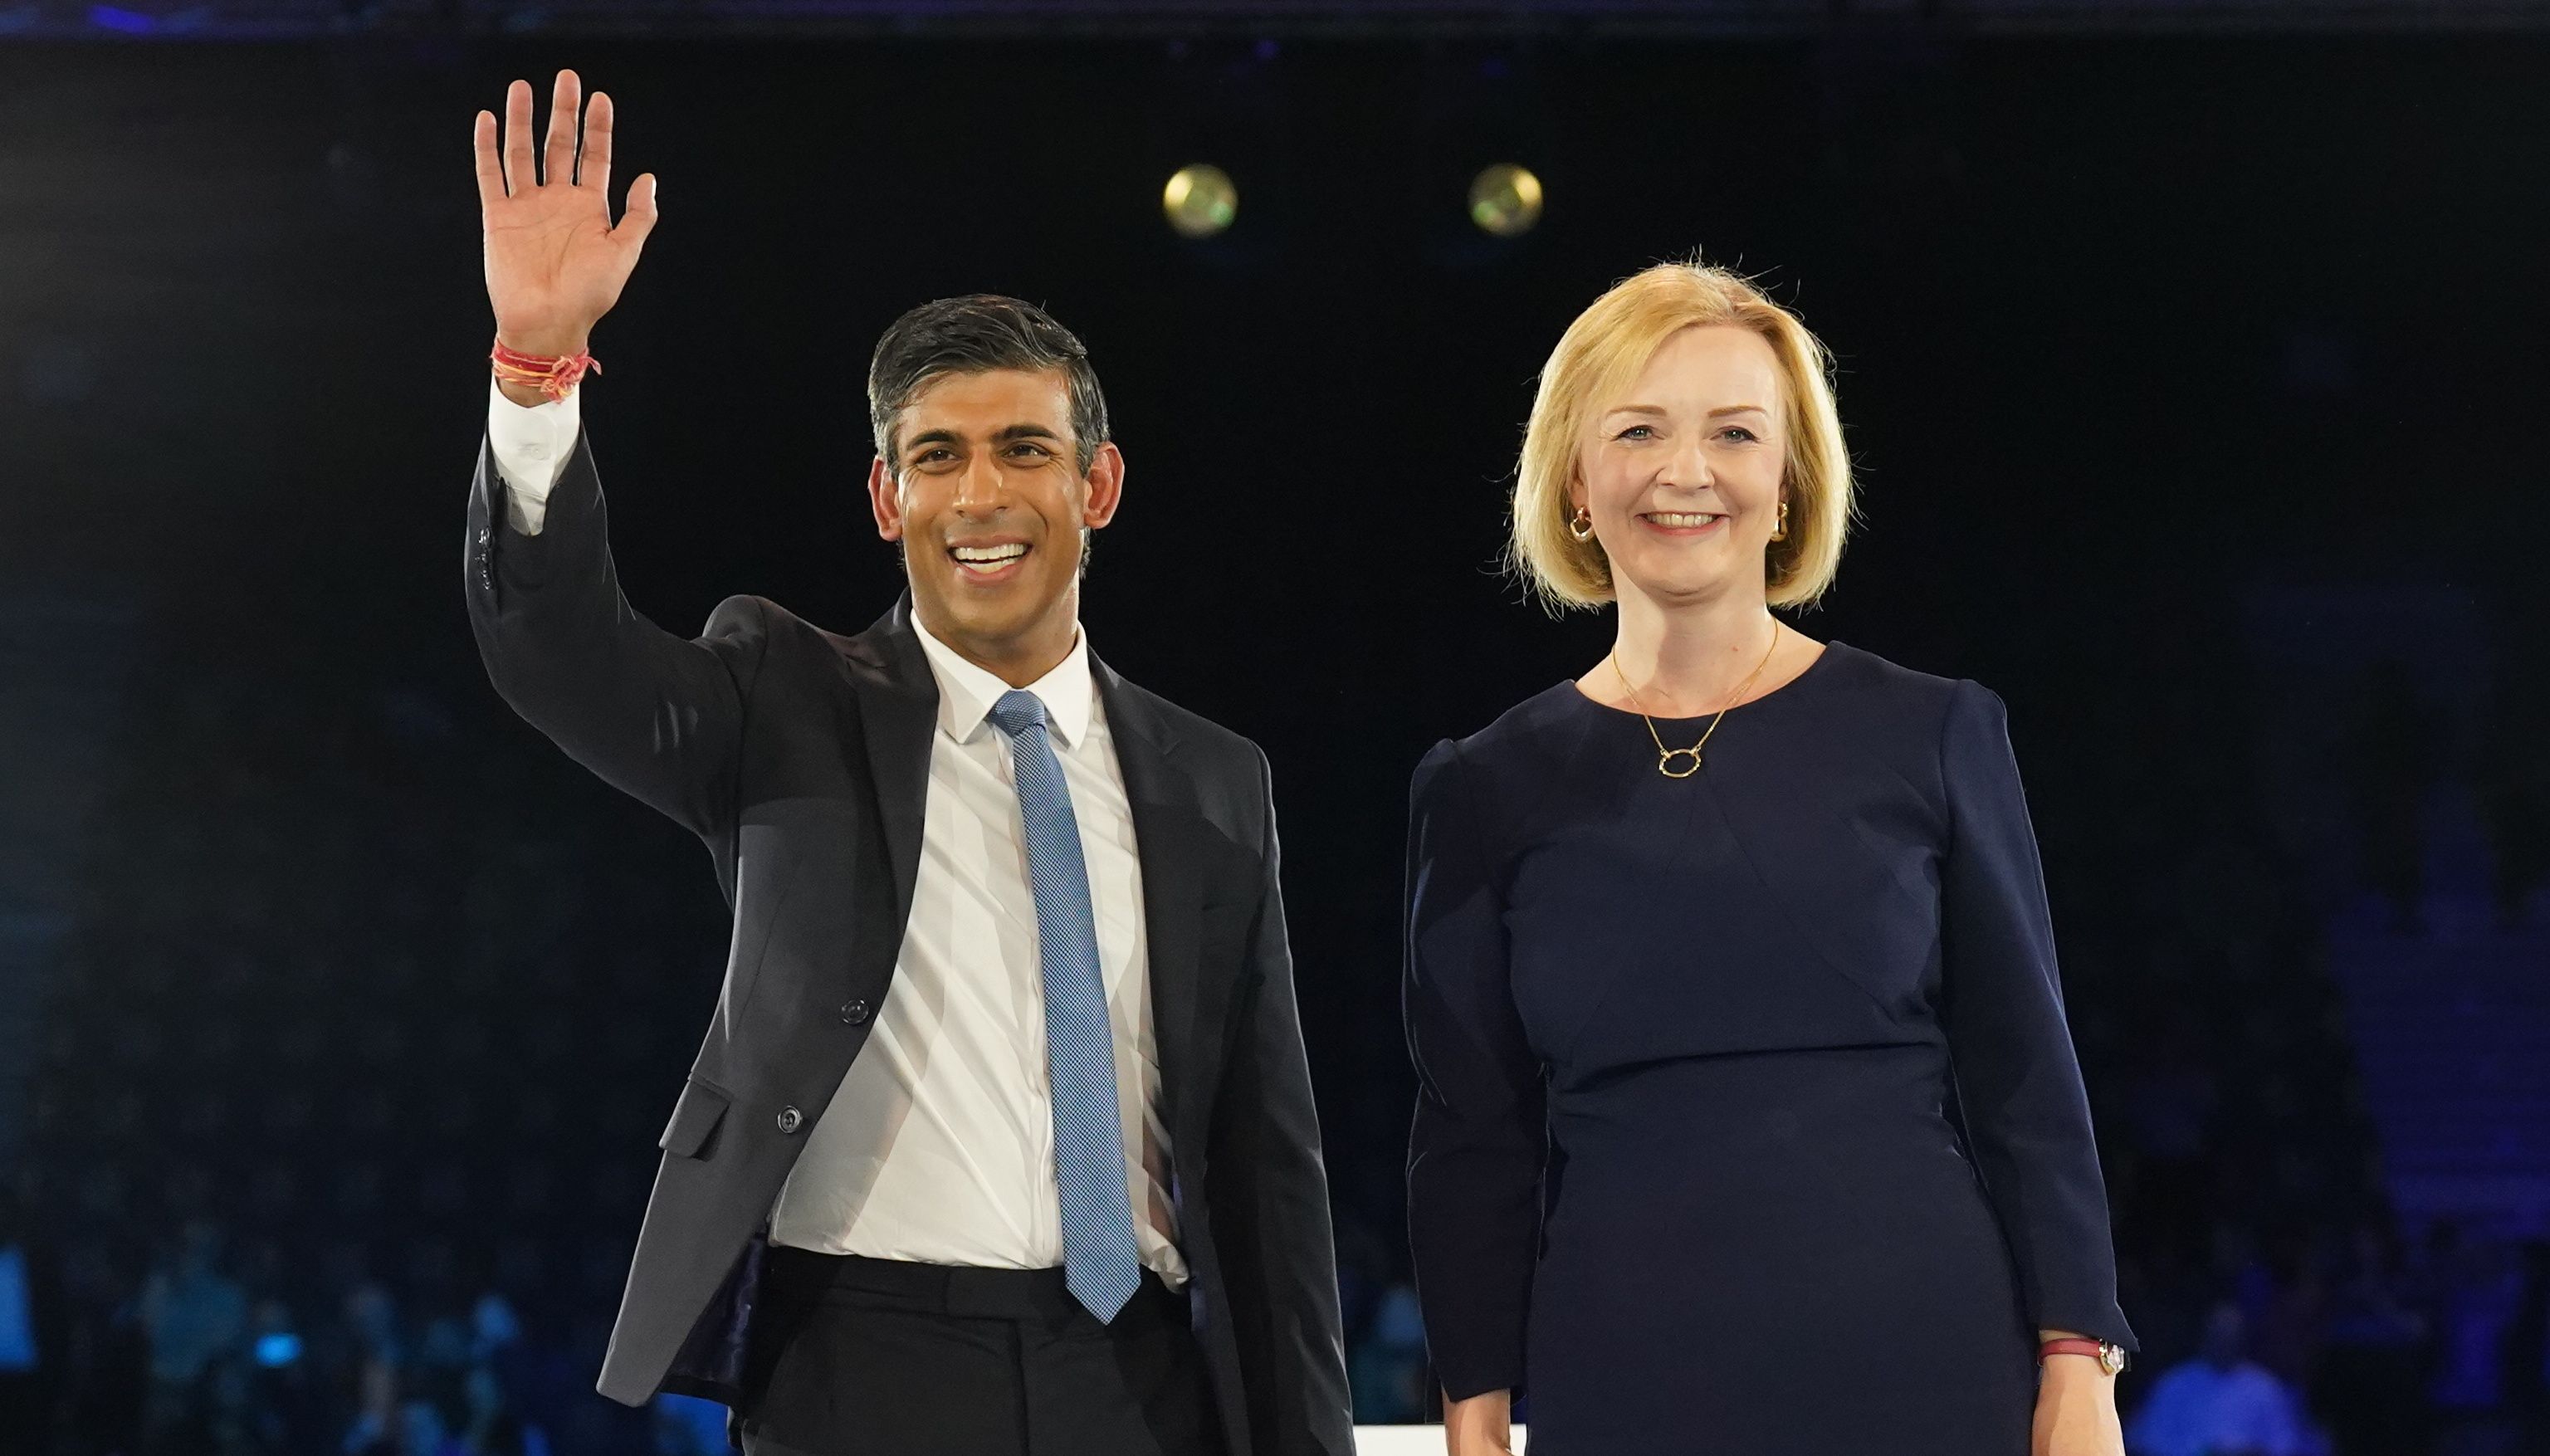 Rishi Sunak and Liz Truss during a hustings event at Wembley Arena, London, as part of their campaign to be leader of the Conservative Party and the next prime minister.